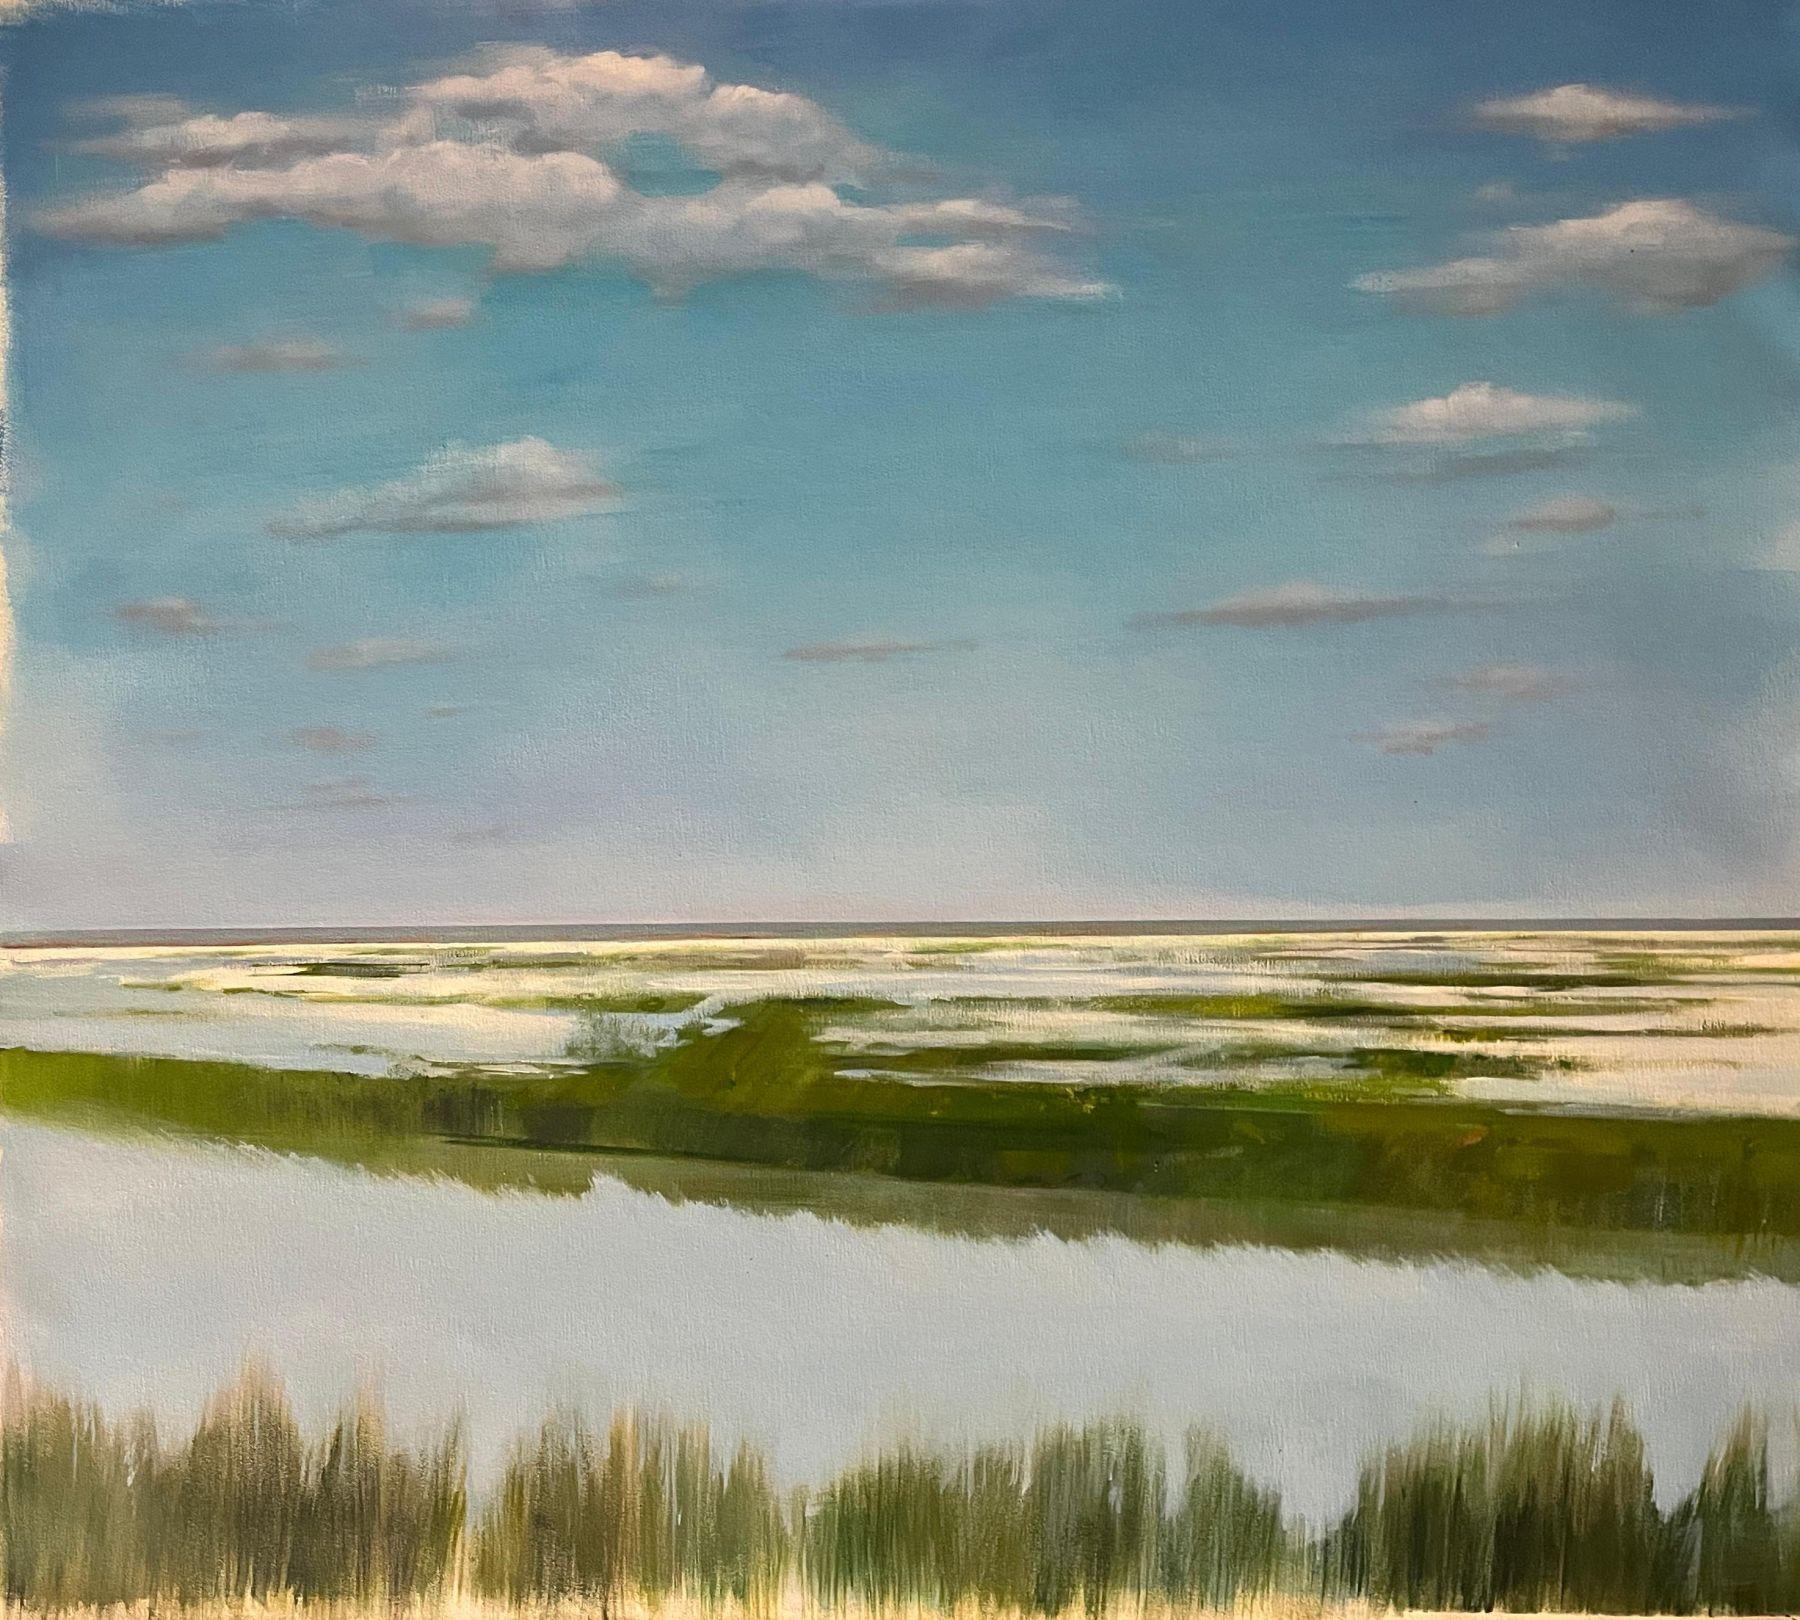 "Endless Sky" is 42x38 oil painting on canvas by artist Jamie Crisol. Feature is an abstracted landscape of a rural marshy landscape in greens, blues and tans. Horizontal lines of land and water create a composition of stacking lines that lead the